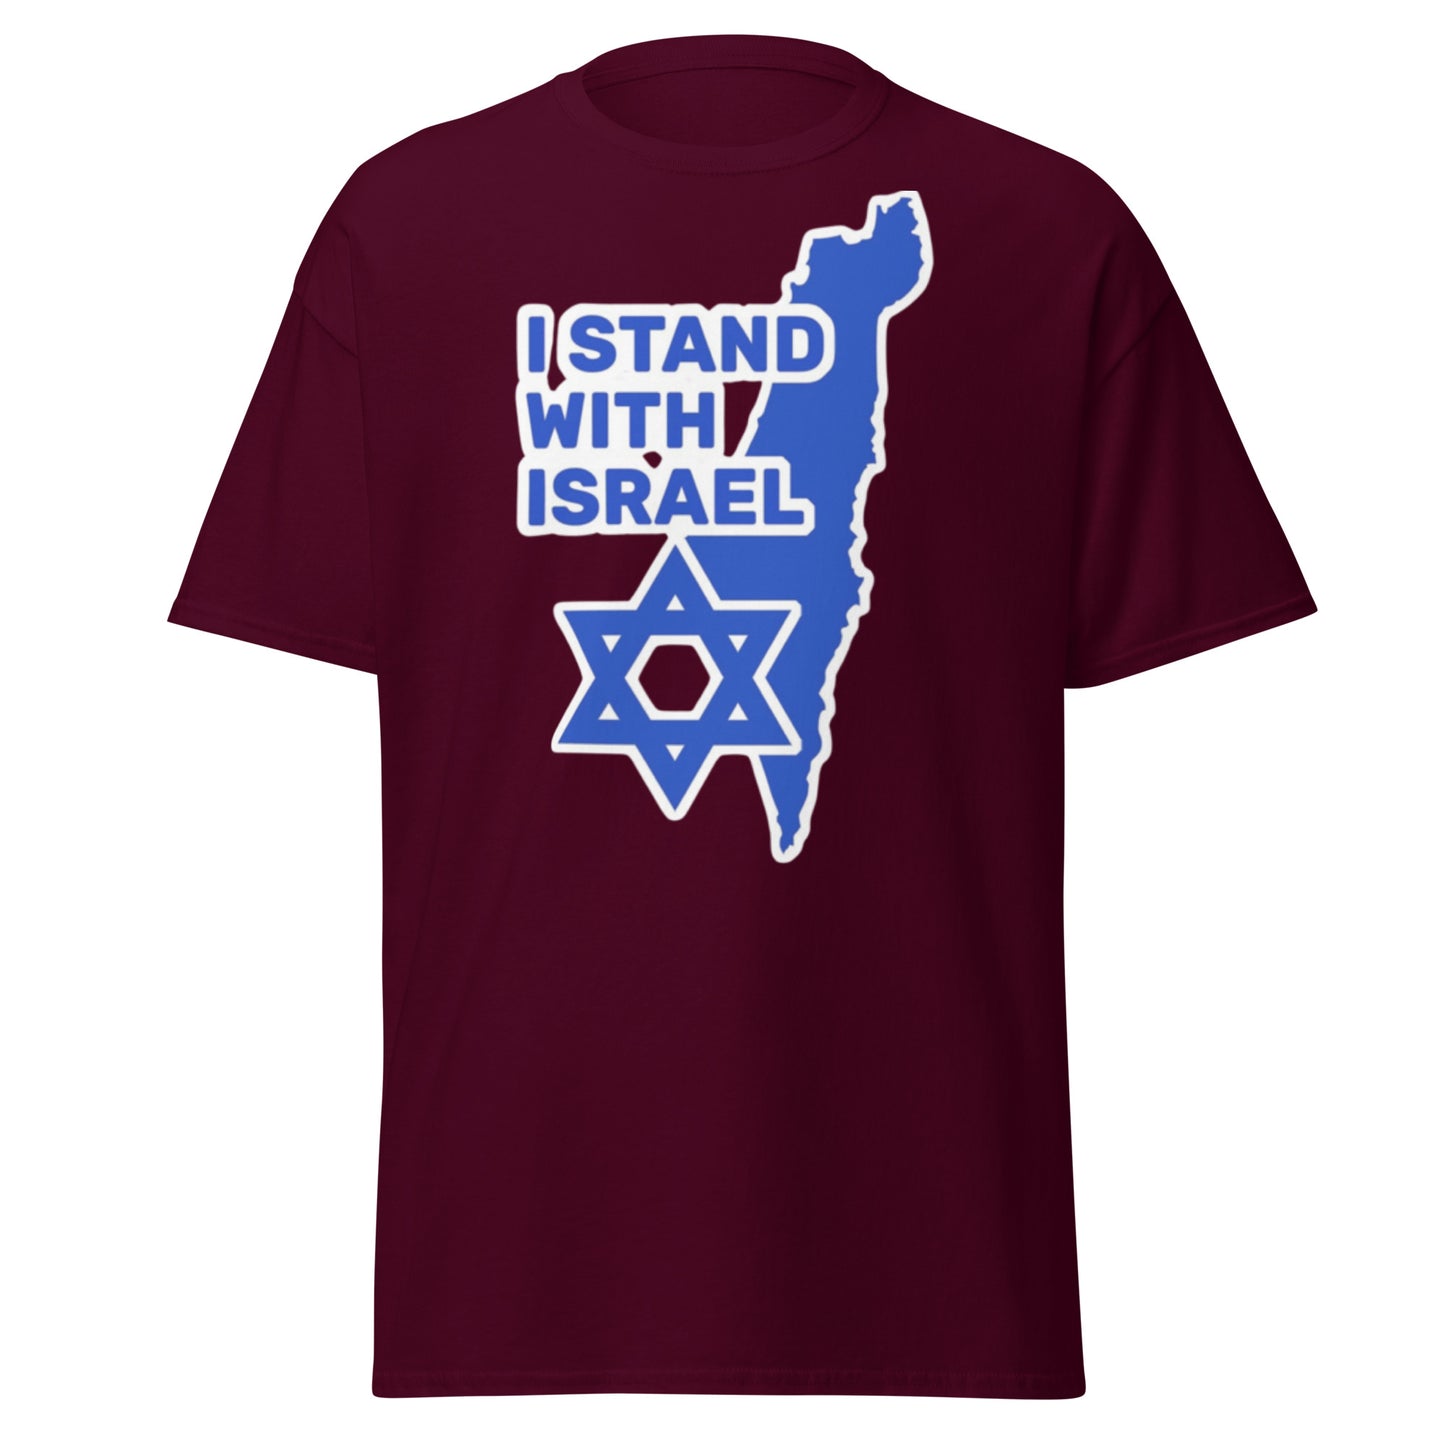 I STAND WITH ISRAEL - DROWN OUT THE ANTI-ISRAEL VOICES